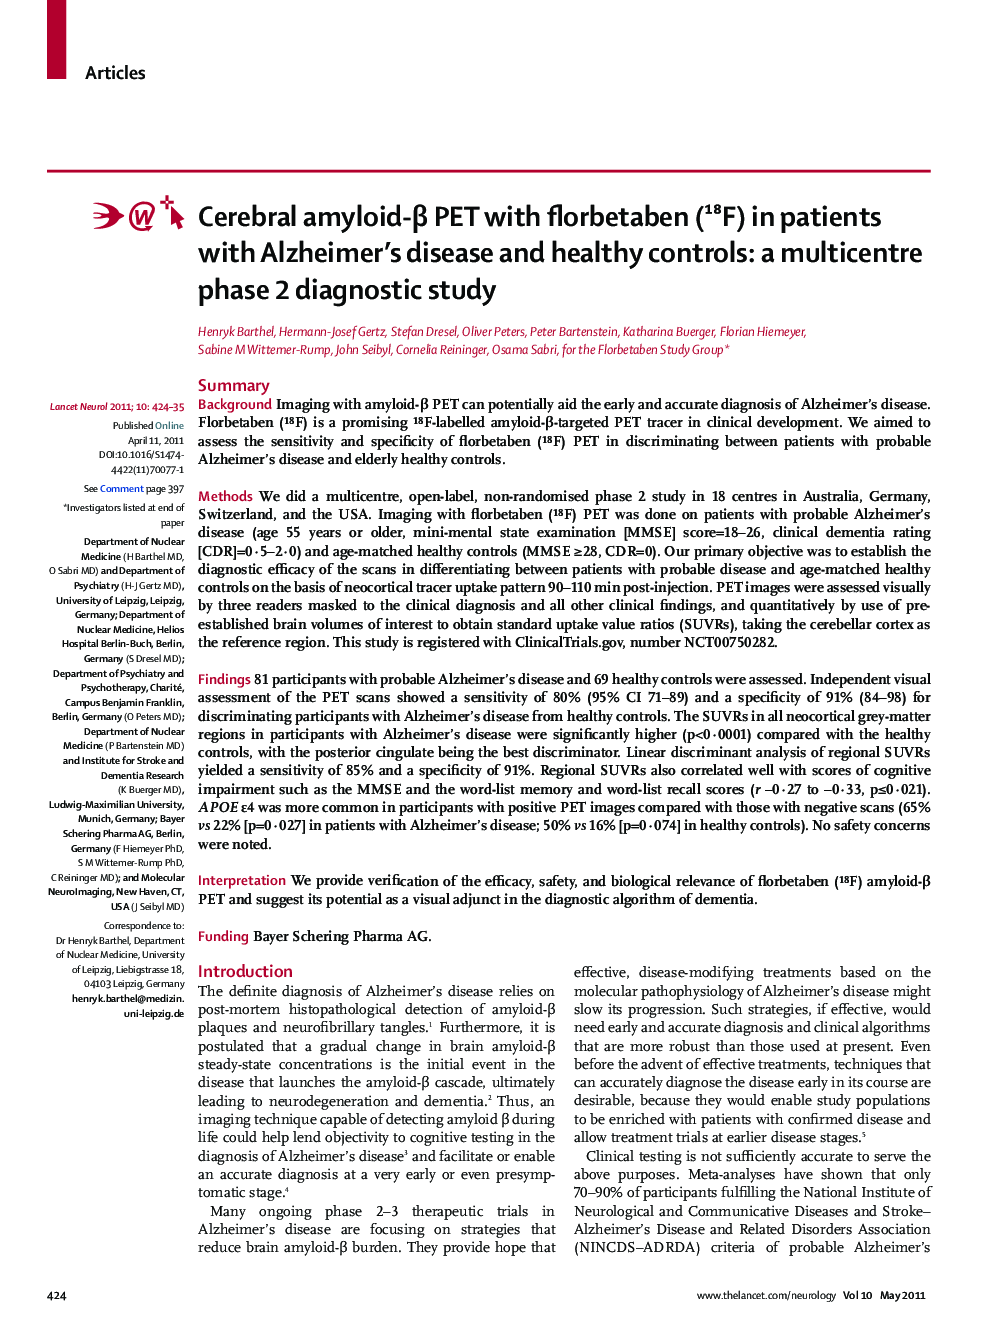 Cerebral amyloid-β PET with florbetaben (18F) in patients with Alzheimer's disease and healthy controls: a multicentre phase 2 diagnostic study